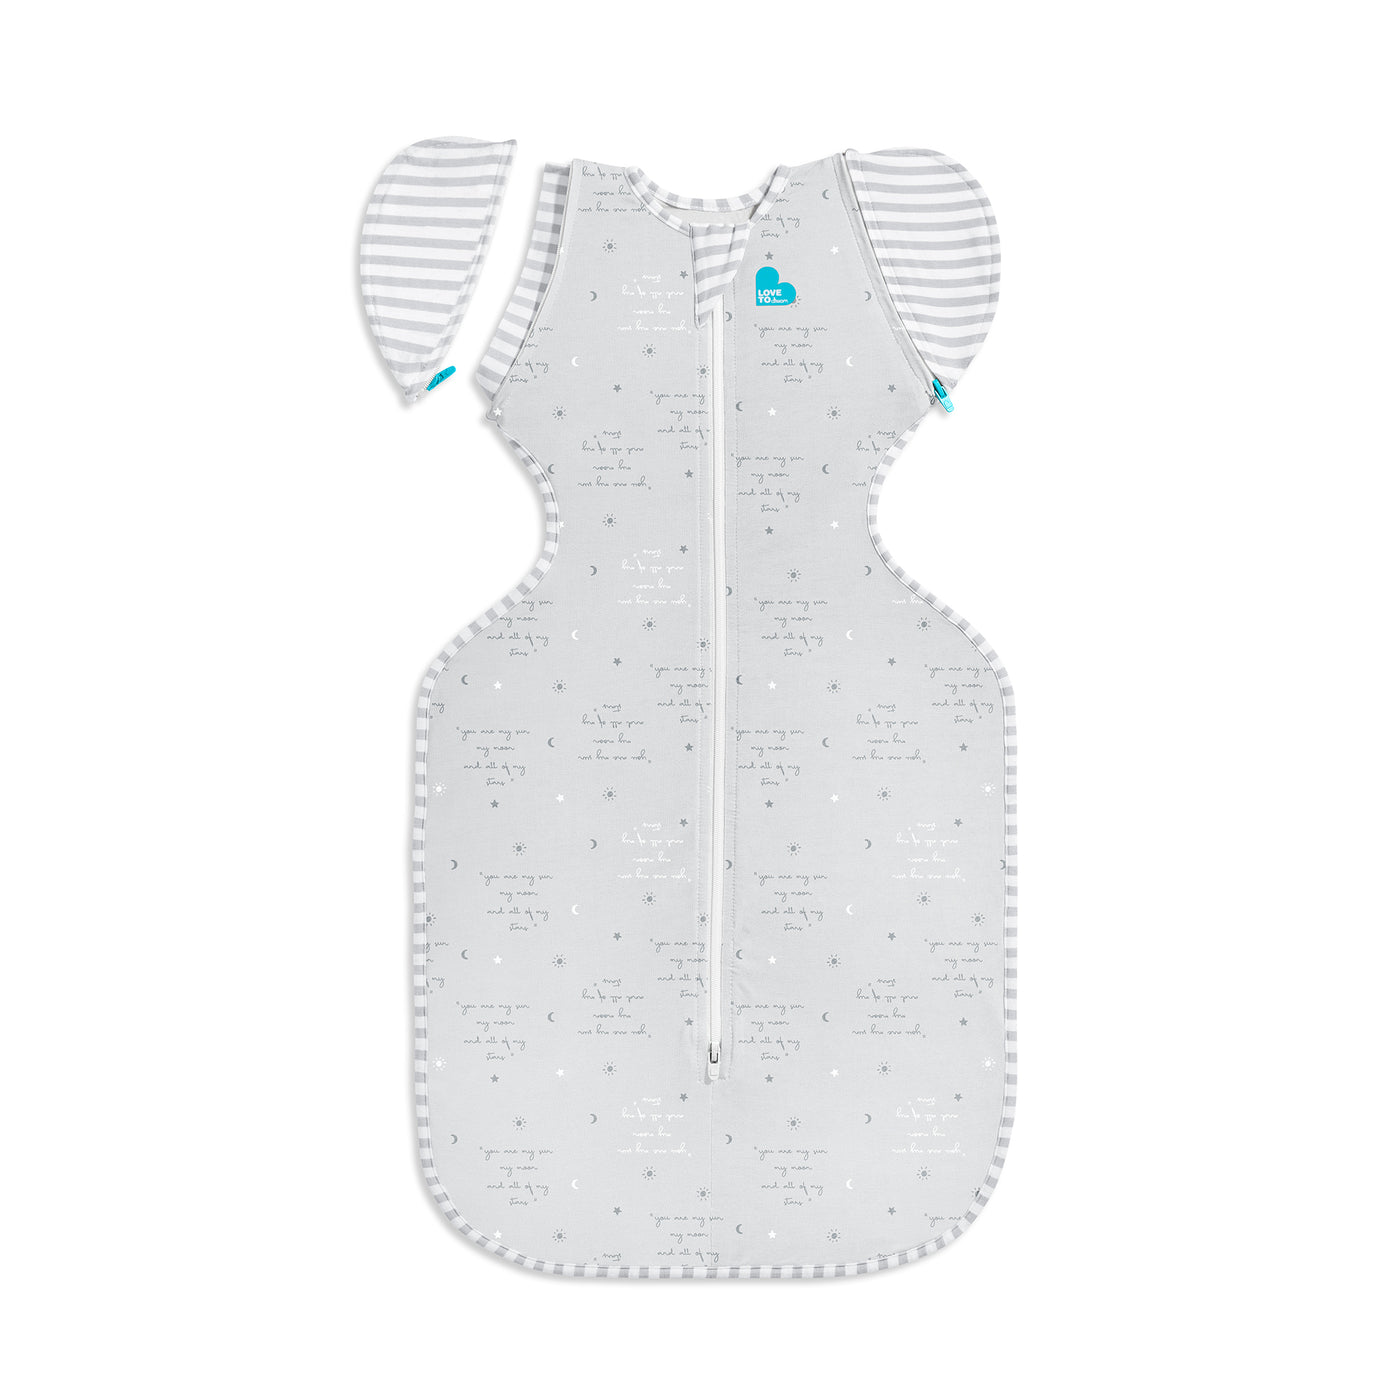 Swaddle Up™ Transition Bag Lite 0.2 TOG - 'You Are My' - Love to Dream™ NZ 